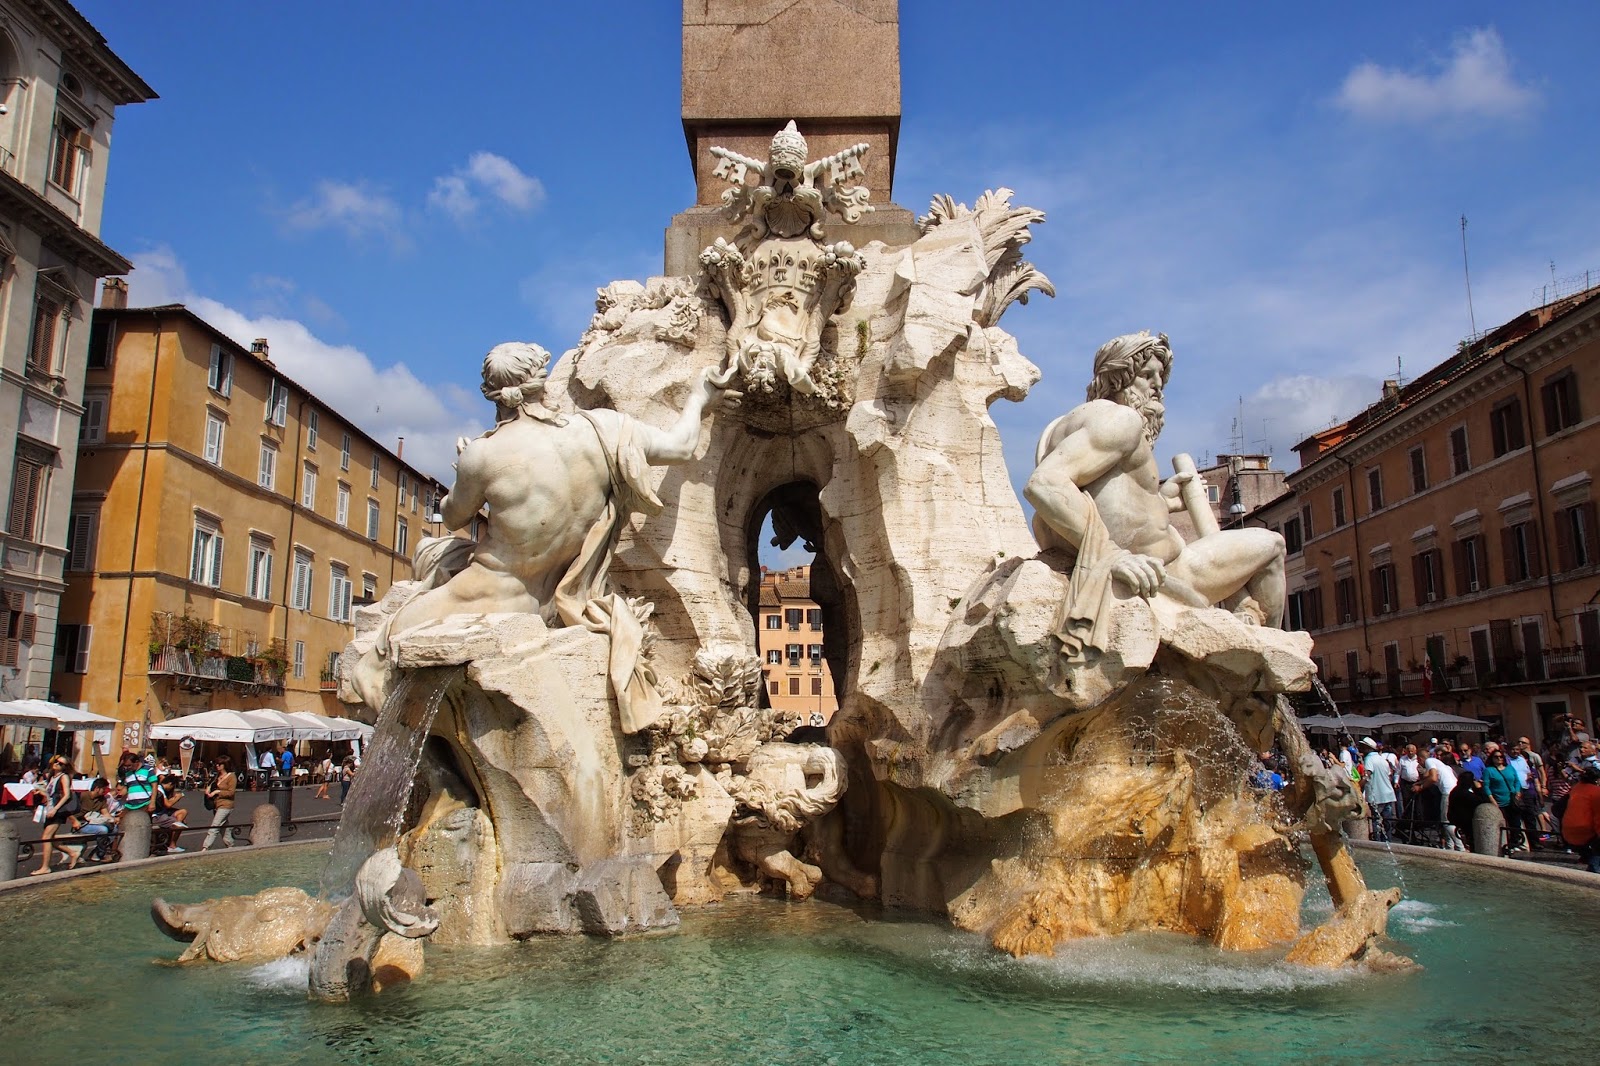 Where is FatBoy ?: Rome : Tre Scalini, Piazza Navona, Pantheon, Trevi ...